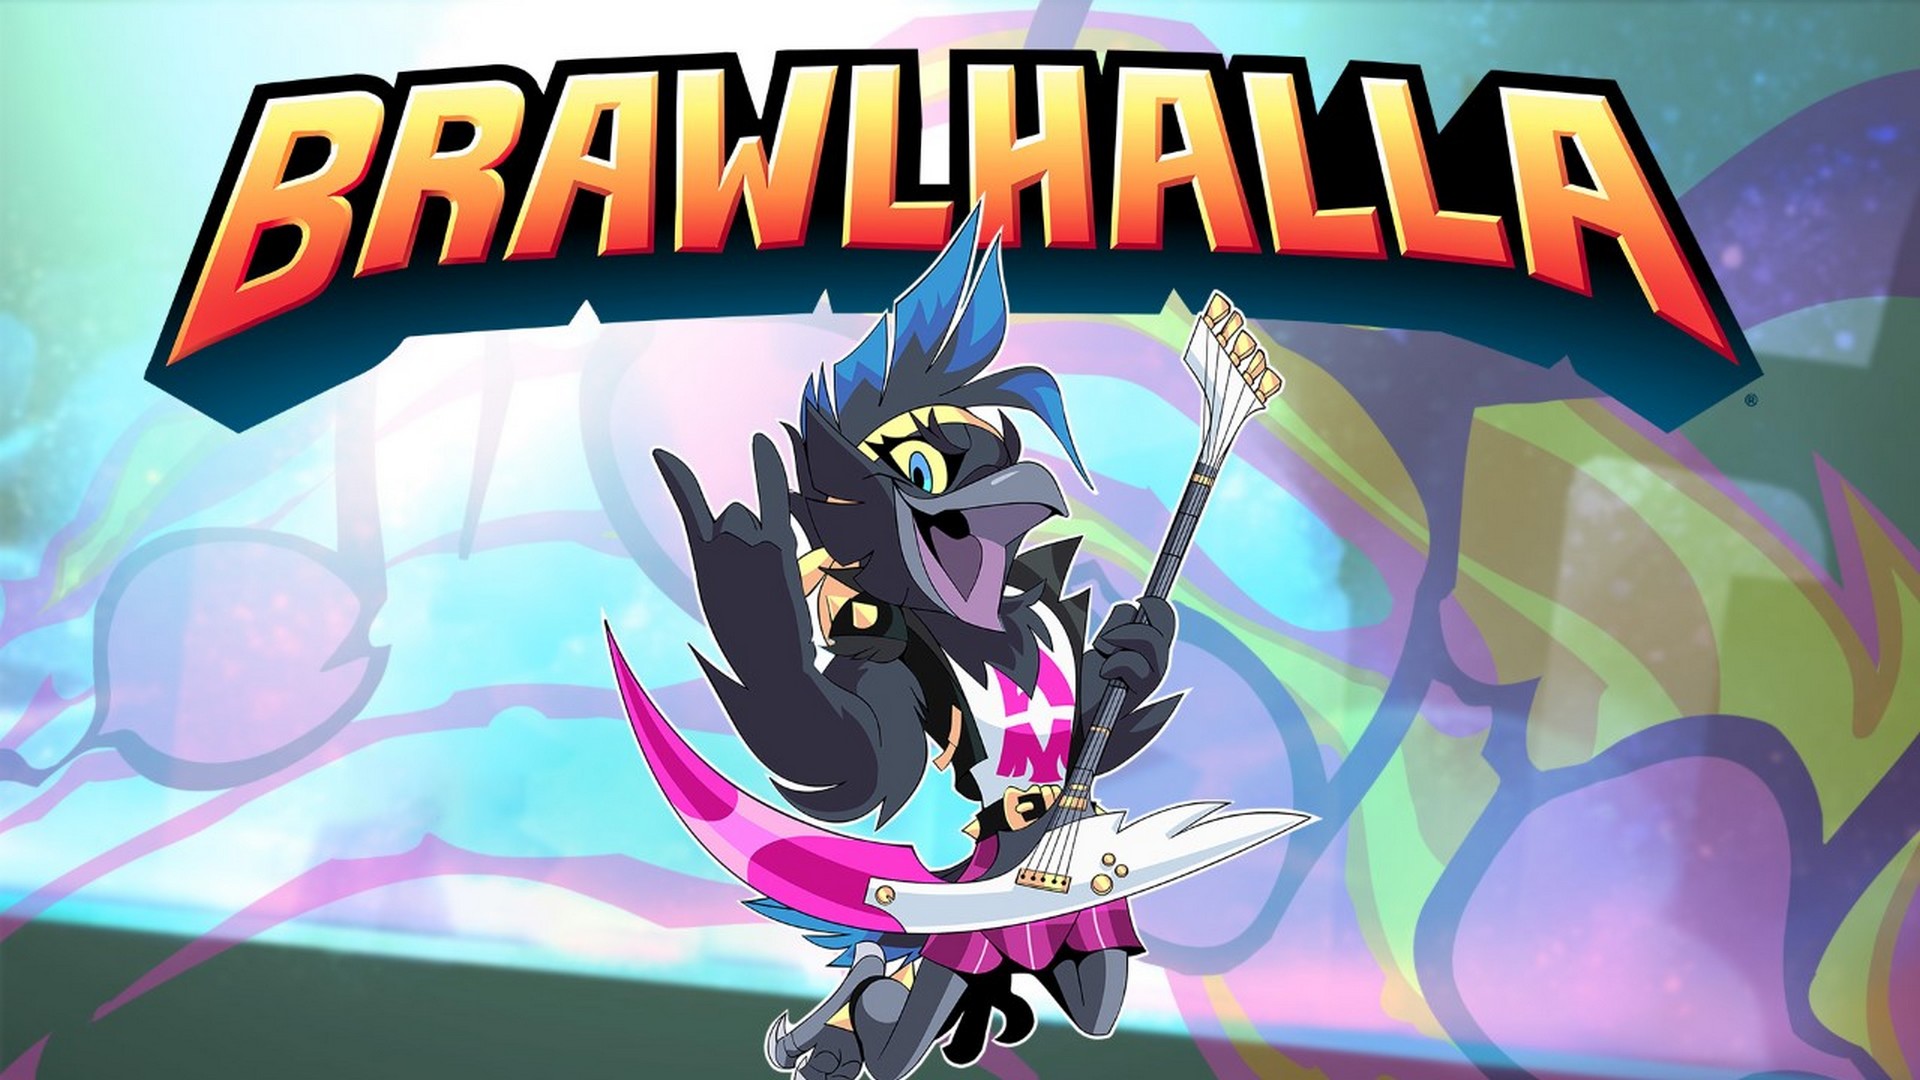 Brawlhalla’s Newest Legend Munin Is Available Today